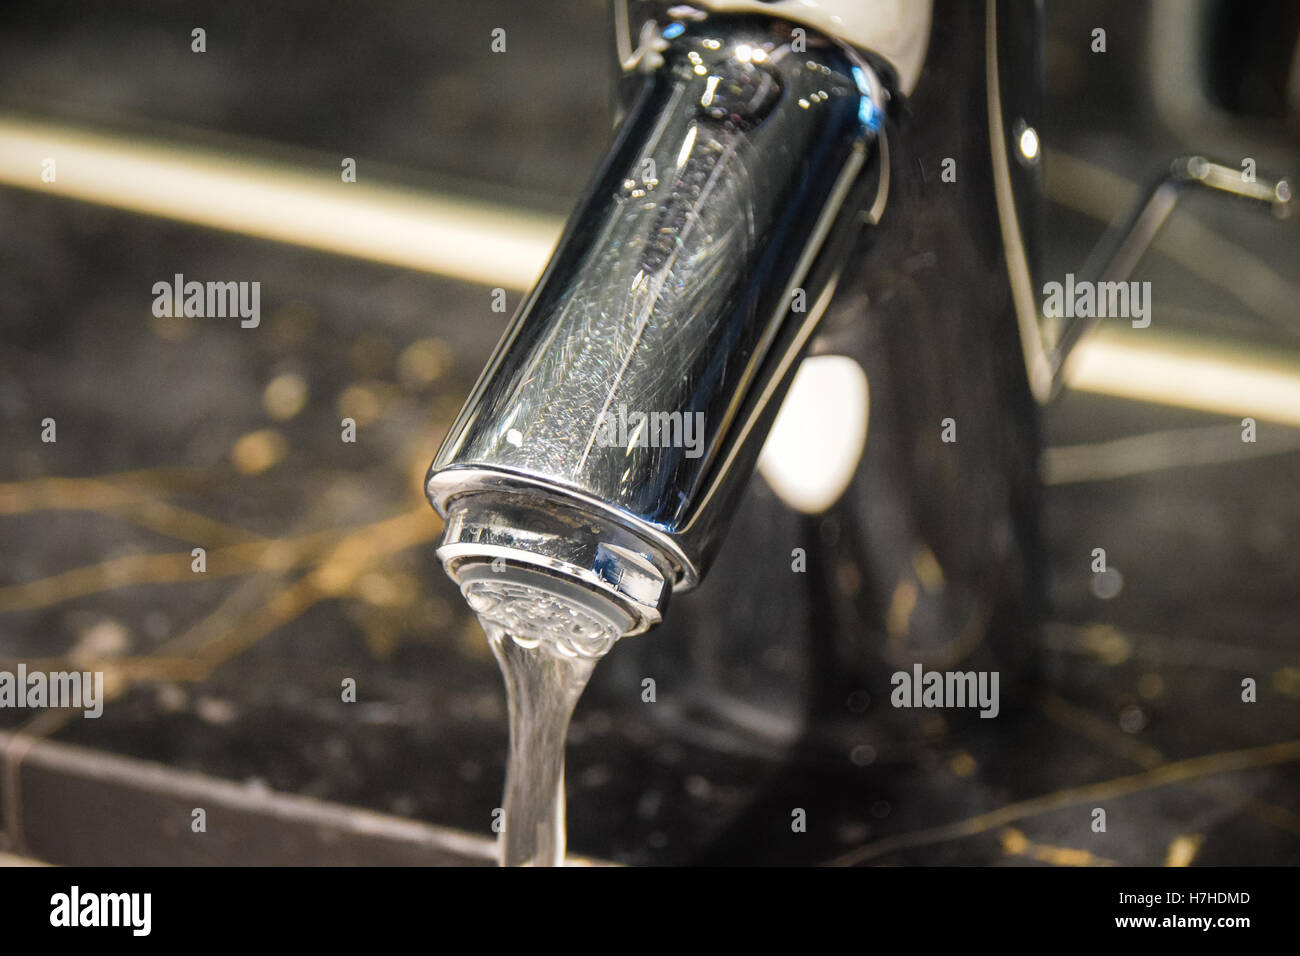 Water running from a tap Stock Photo